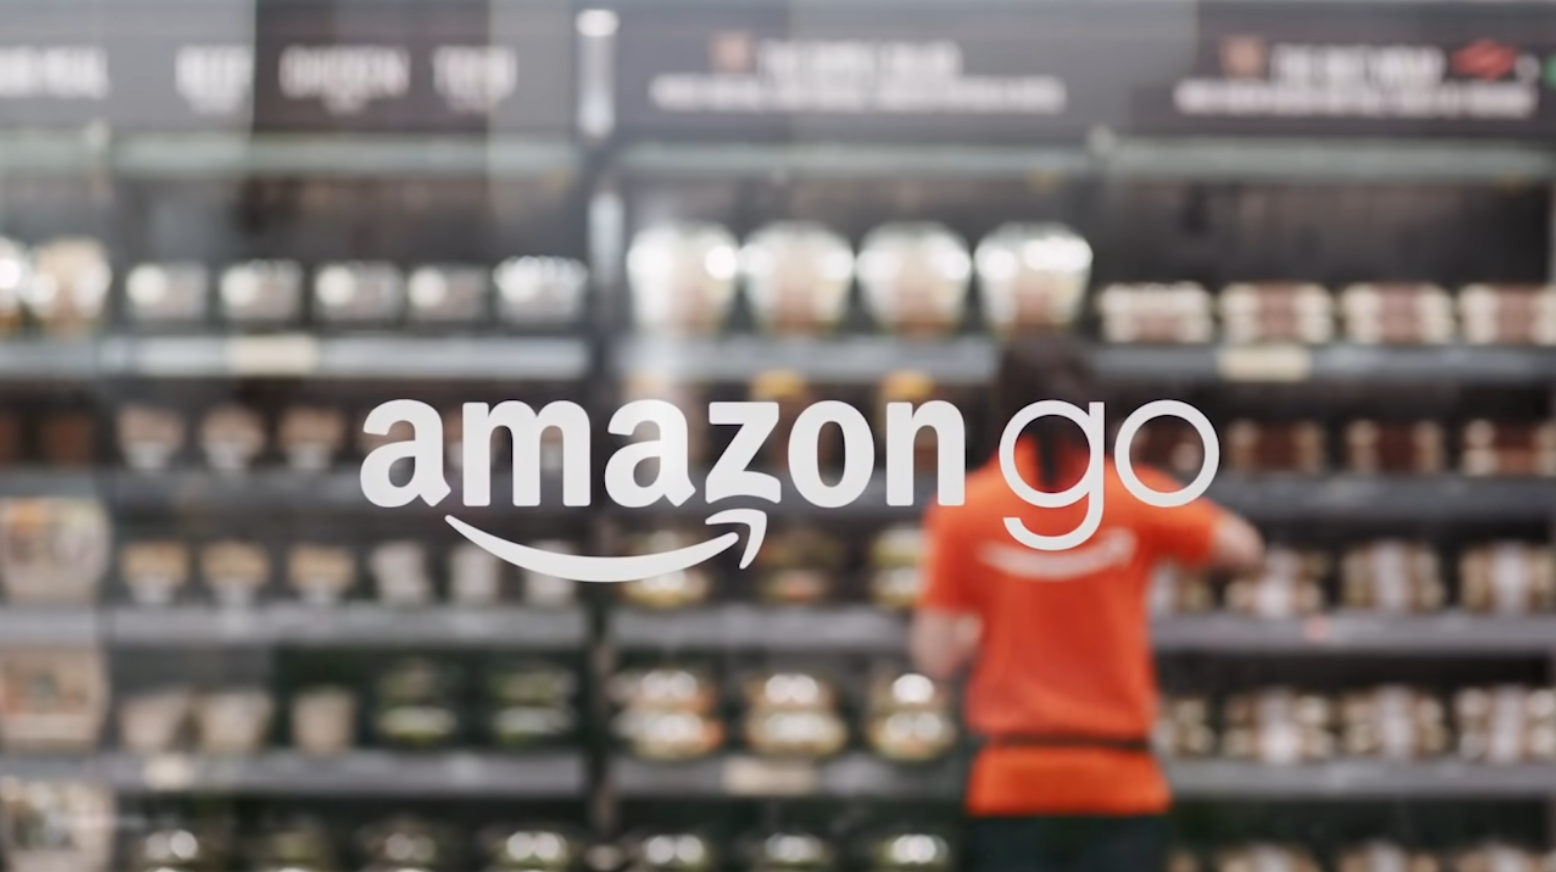 Exploring the Potential for Inventory Innovation through Retail Tech: Amazon Go